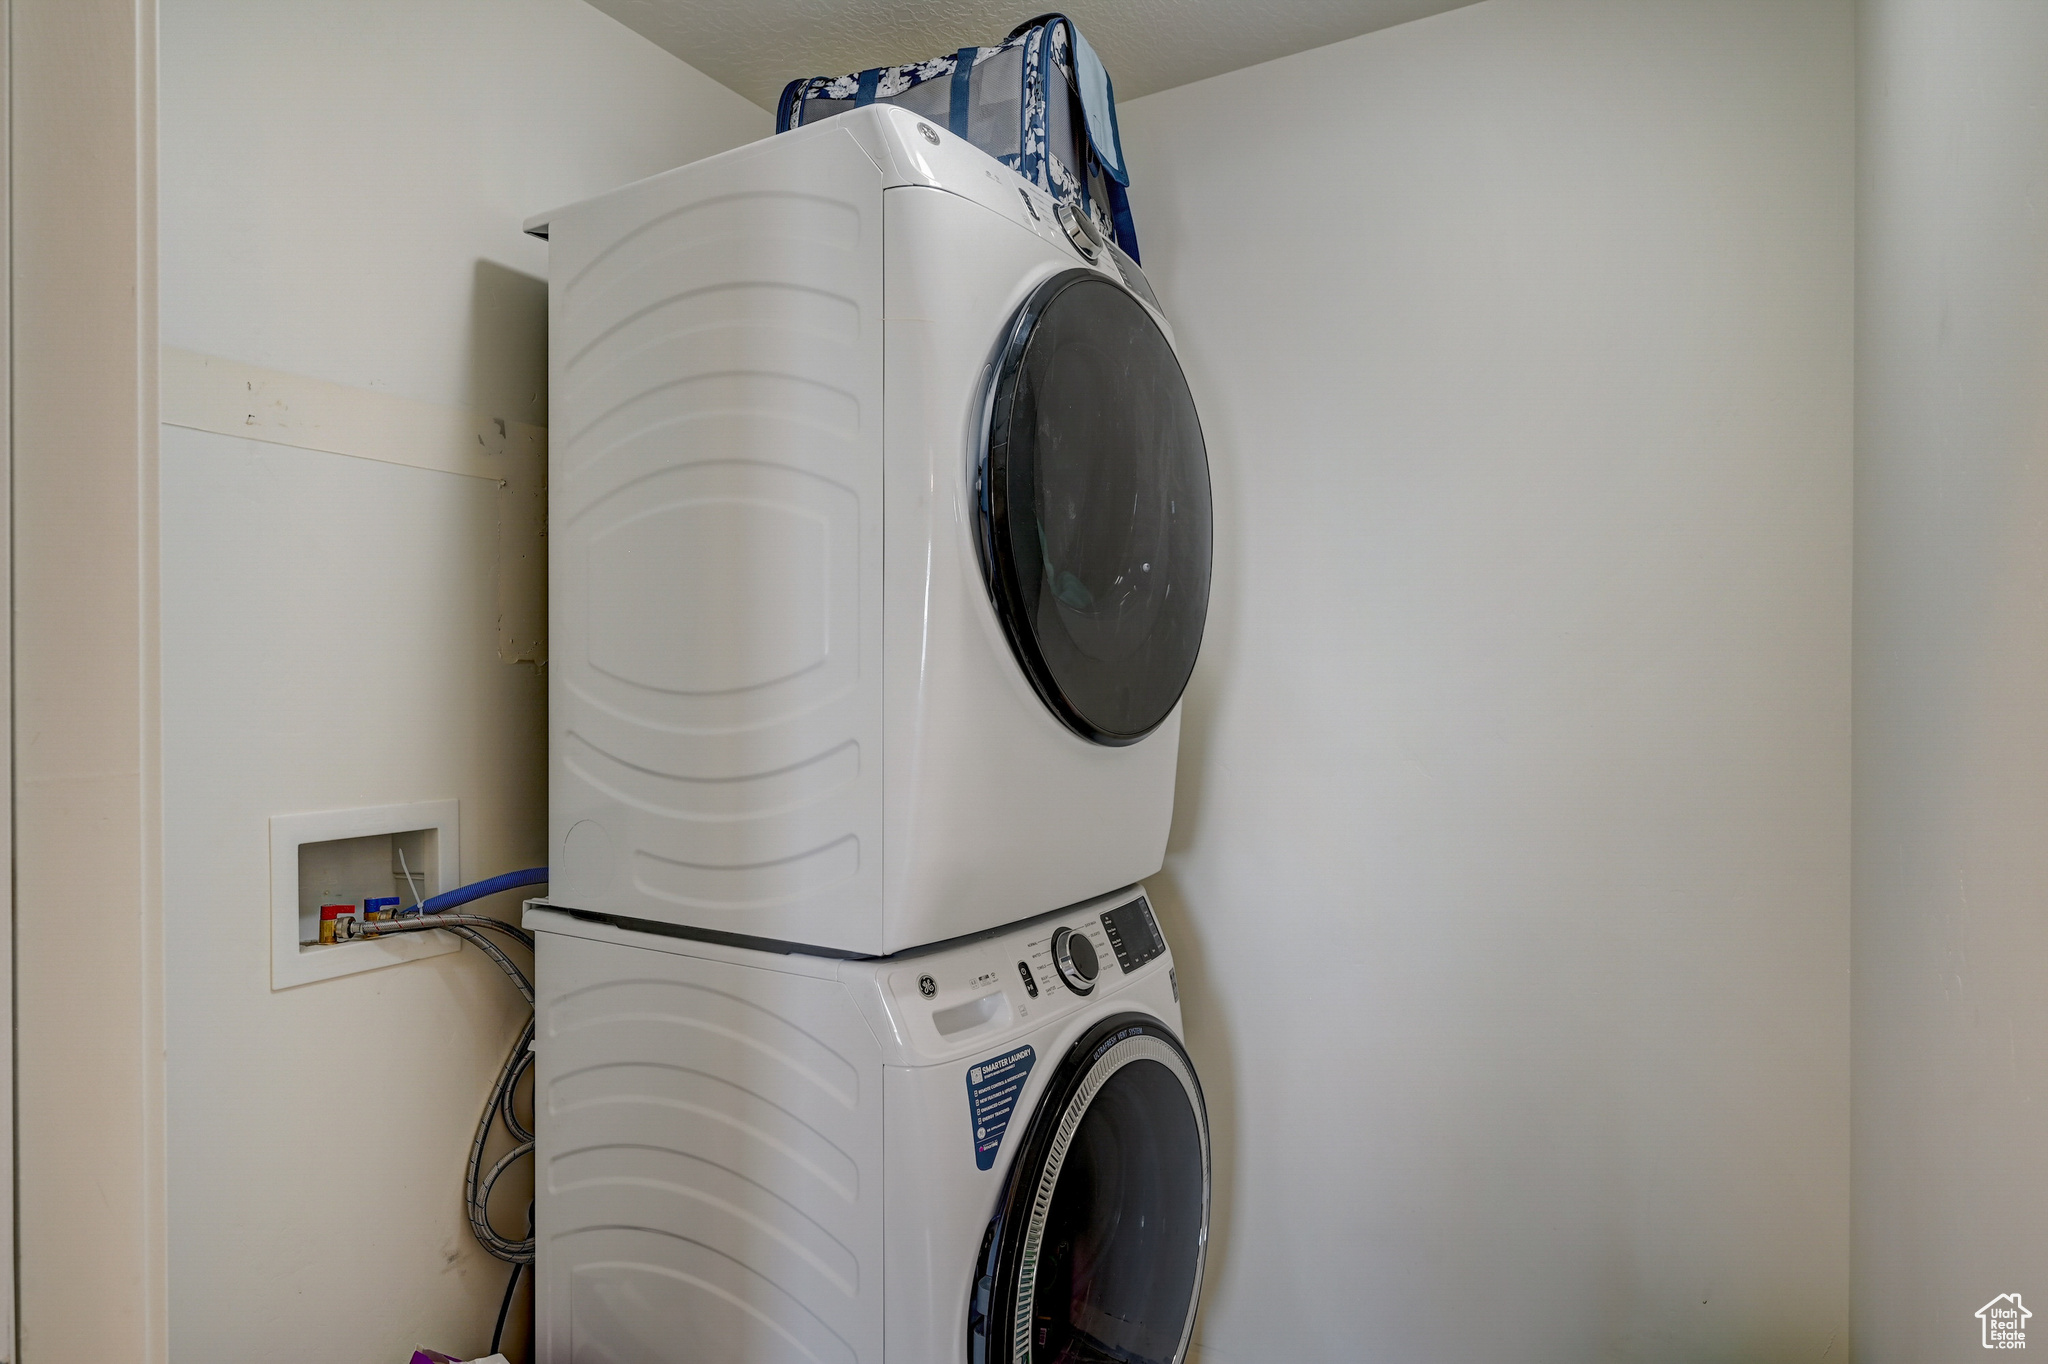 Clothes washing area with stacked washing maching and dryer and washer hookup